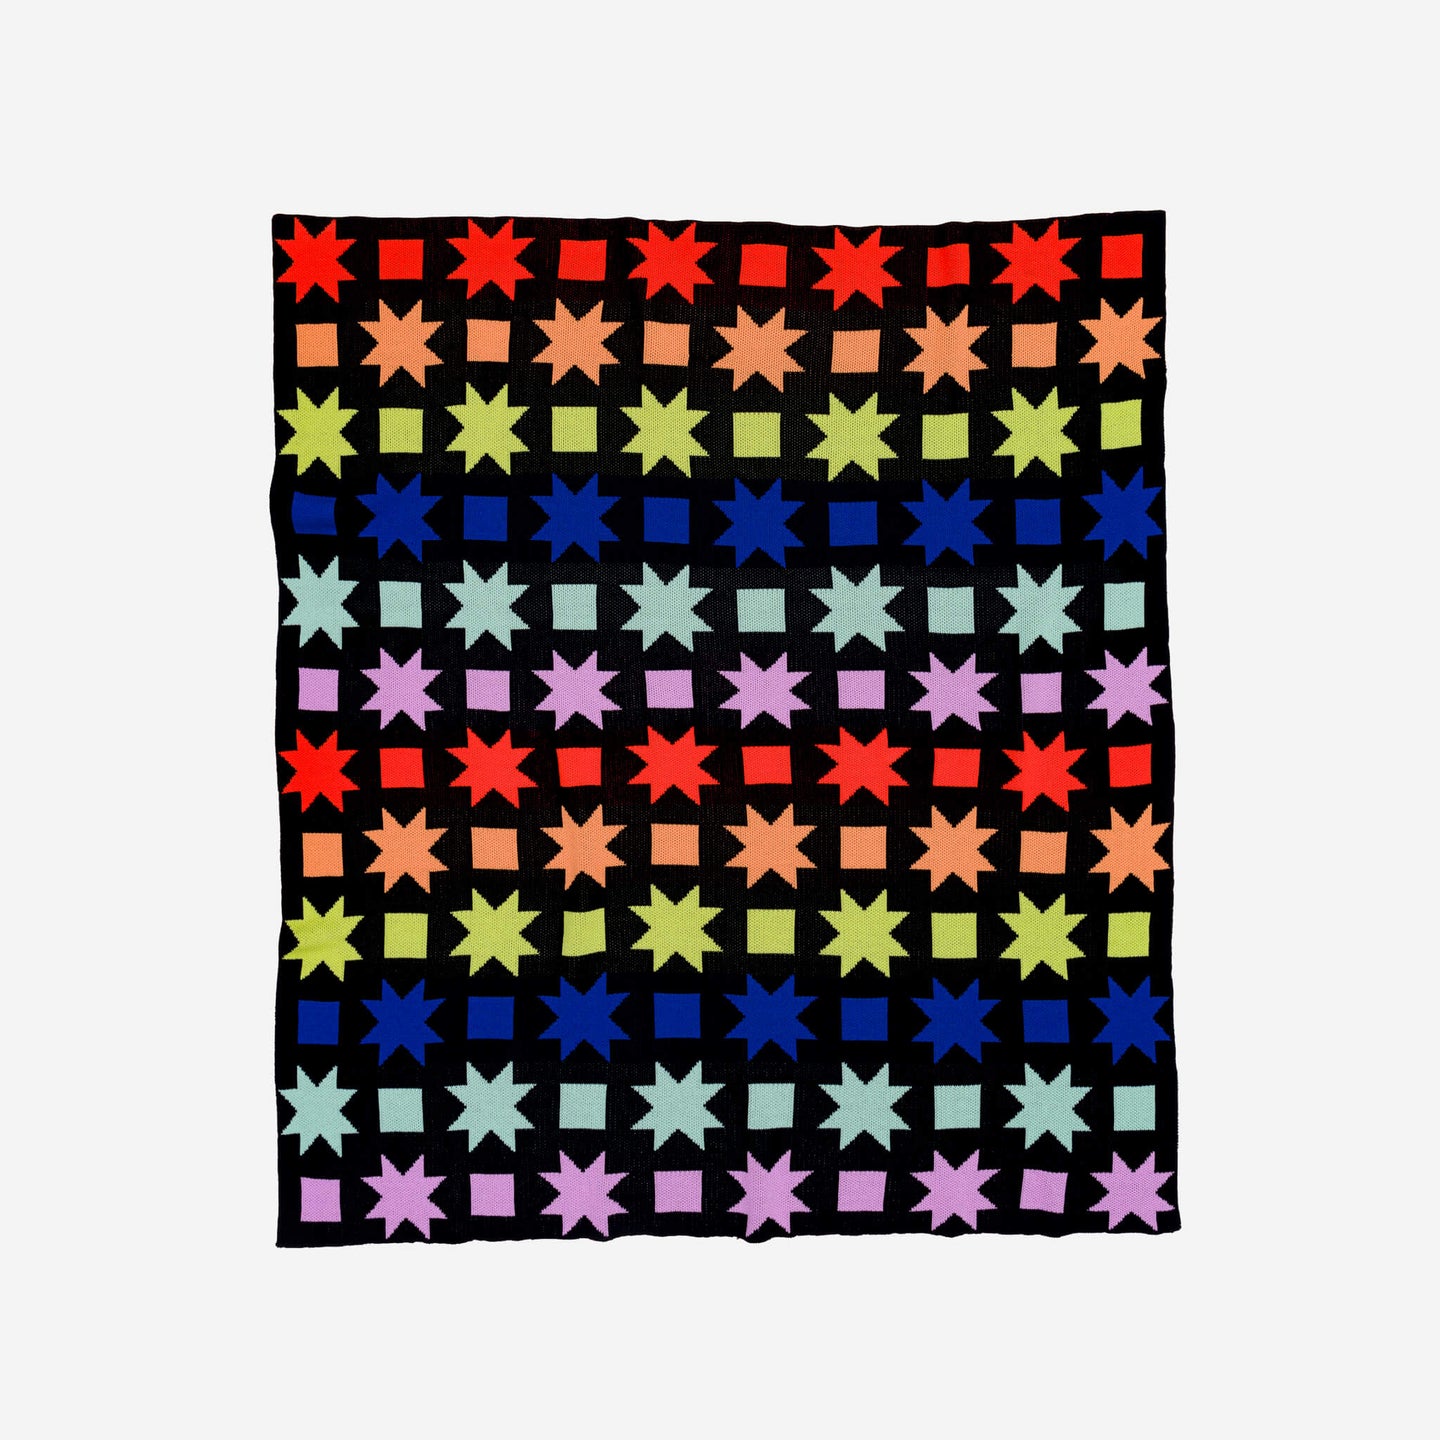 Quilt Star Knit Throw Bold Graphic Pattern Cozy